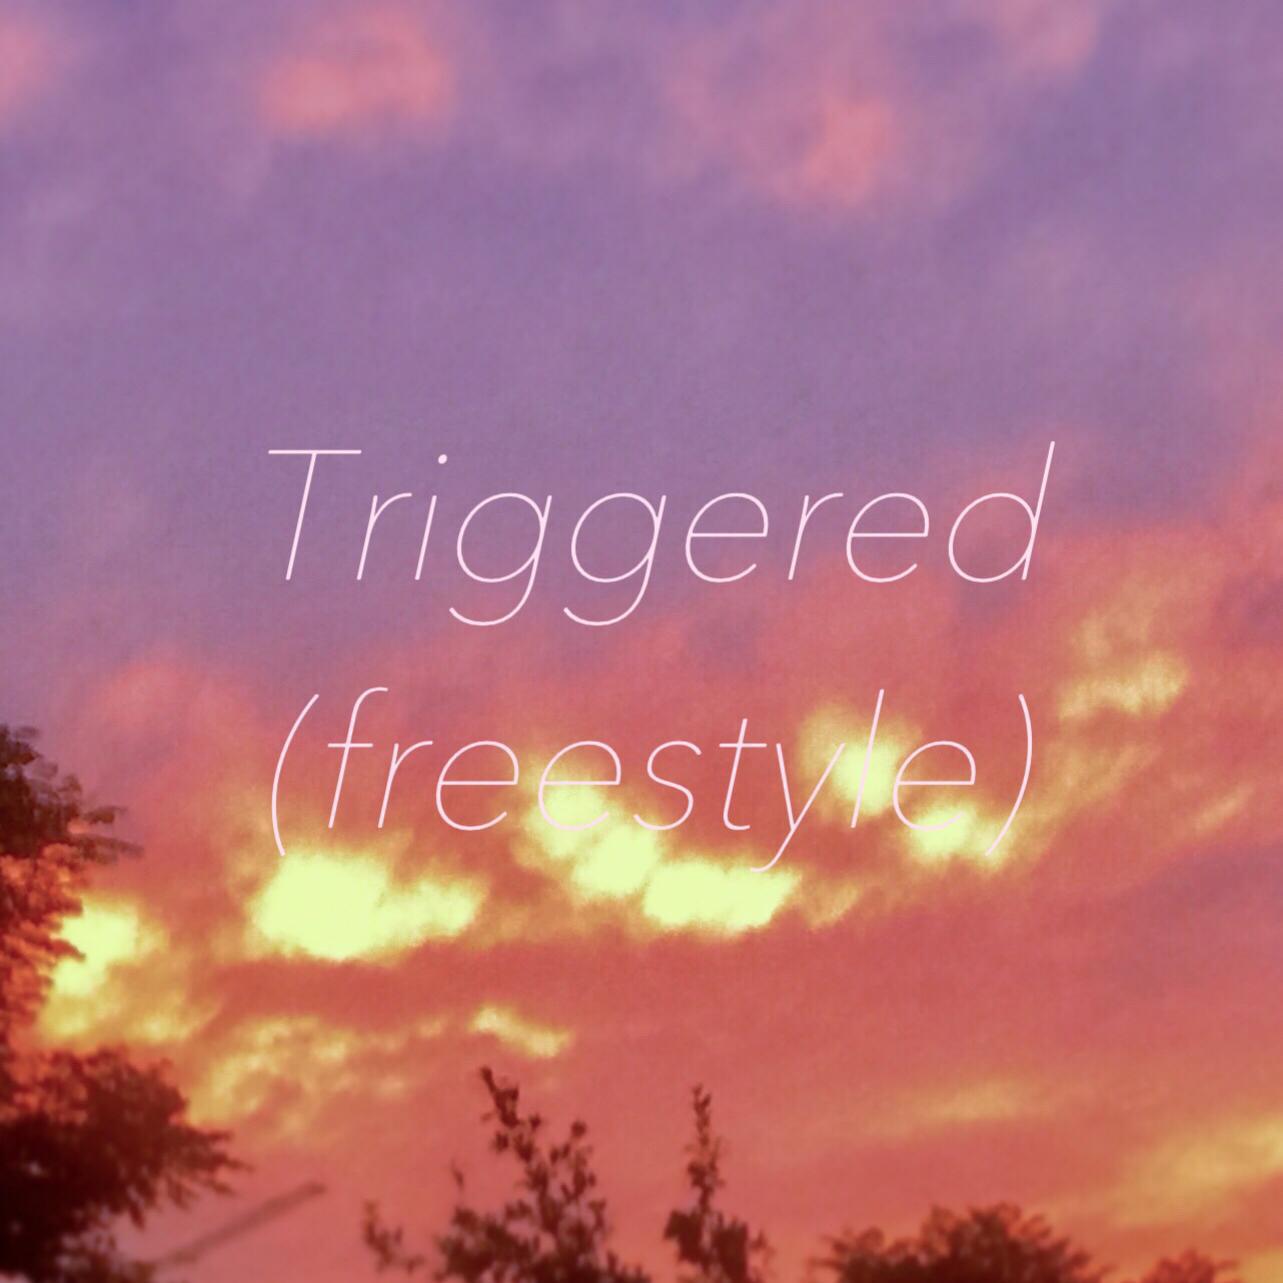 Ares - Triggered(freestyle)